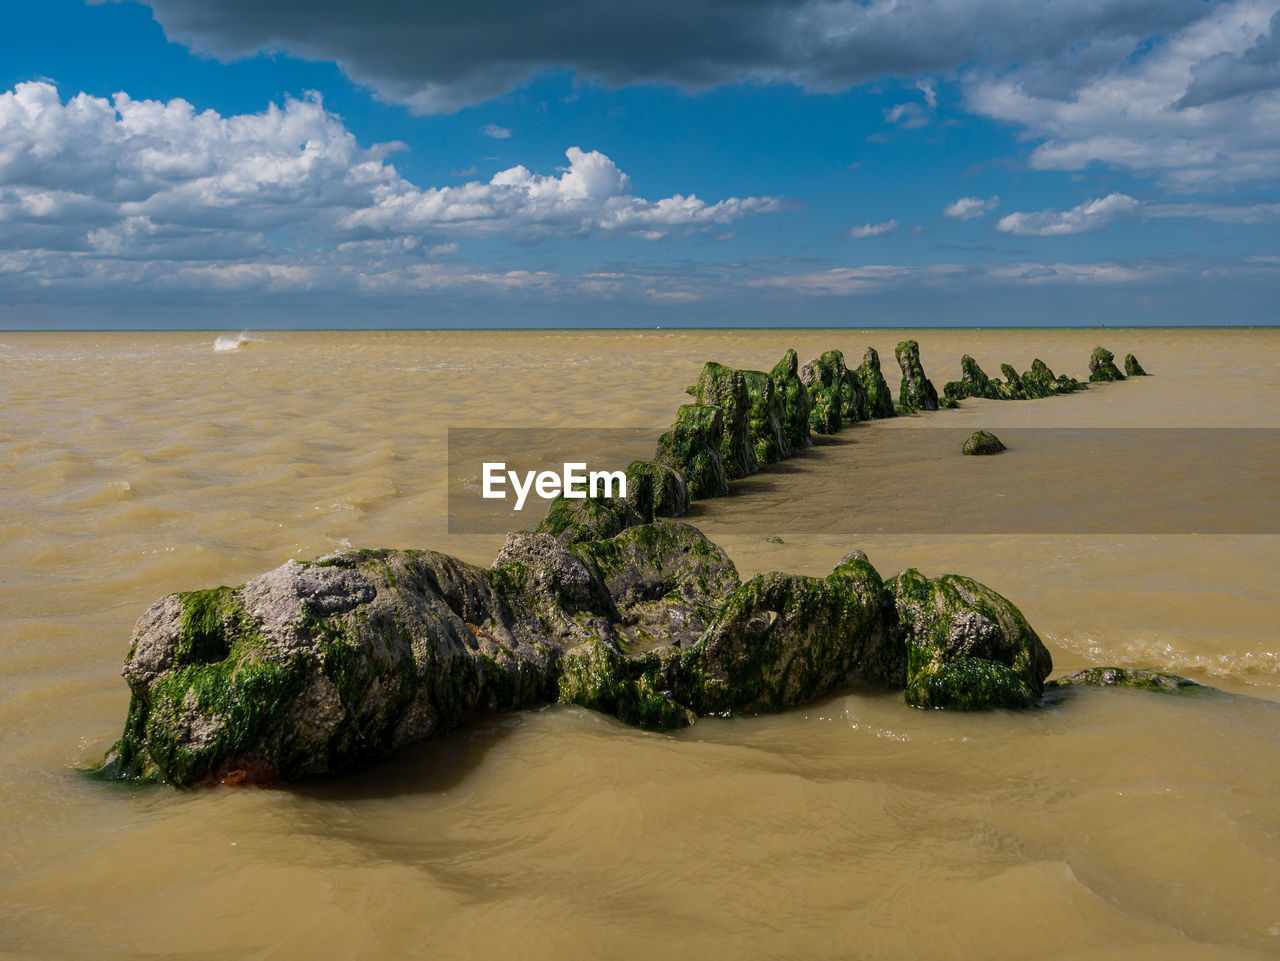 Algae covered leftovers of a shipwreck from a world war ship at a beach in northern france